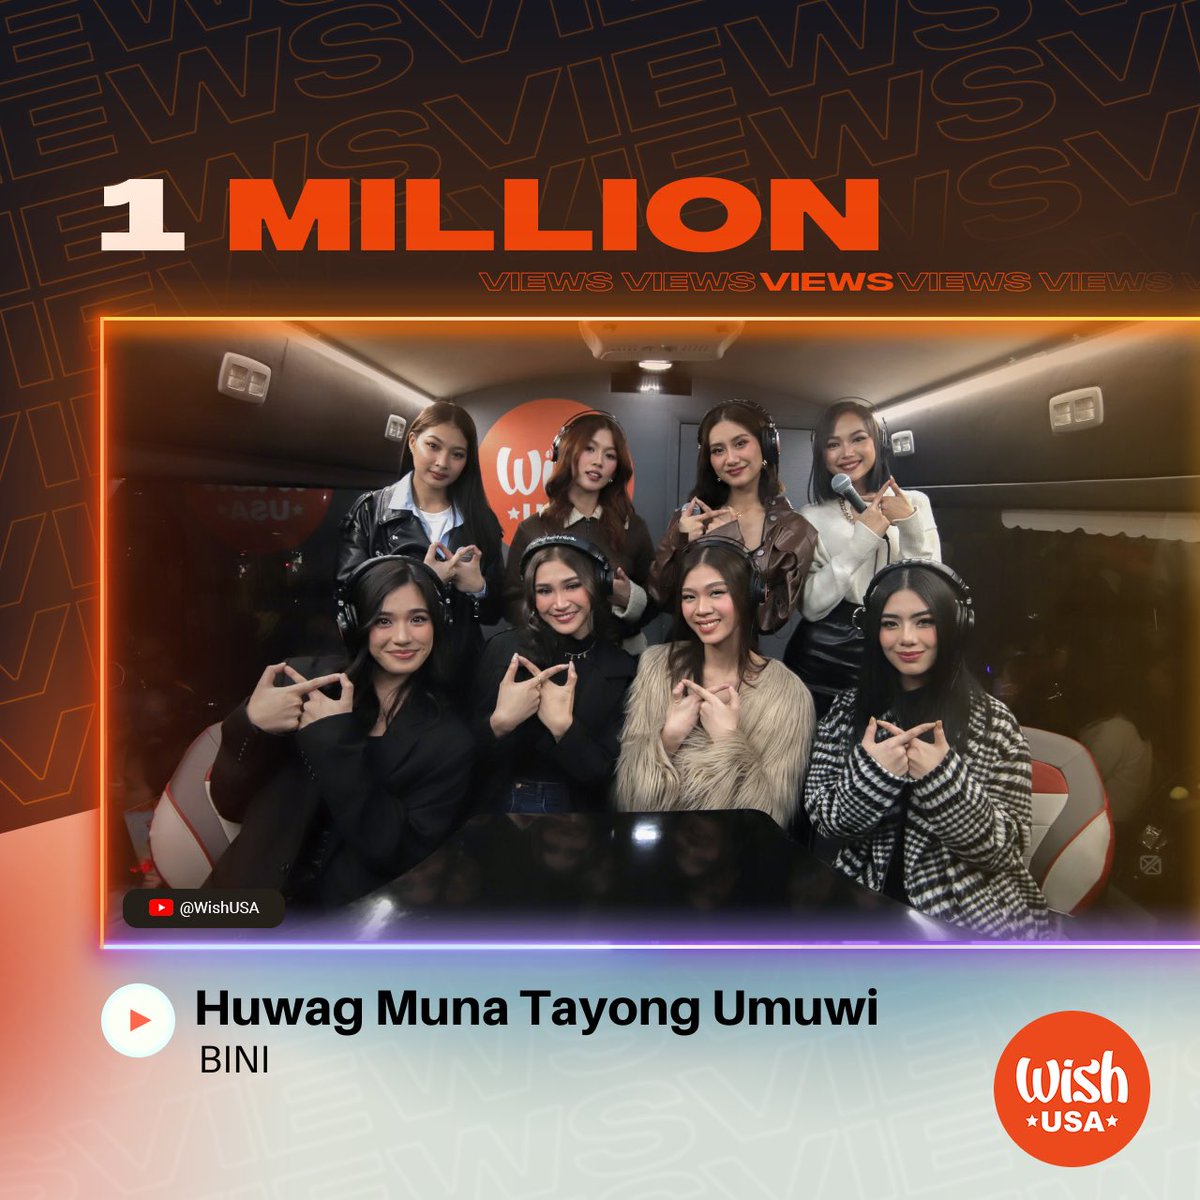 Hey BLOOMs, get ready to dance! 🎉 BINI’s “Huwag Muna Tayong Umuwi” is skyrocketing views above the million mark! 🚀 Let’s keep the love coming and take them to the top! 💃🎶 #BINI #PpopRising

#HuwagMunaTayongUmuwi #PpopRising #BLOOMs #BINIPhilippines #OPM #PinoyPop #MusicHits